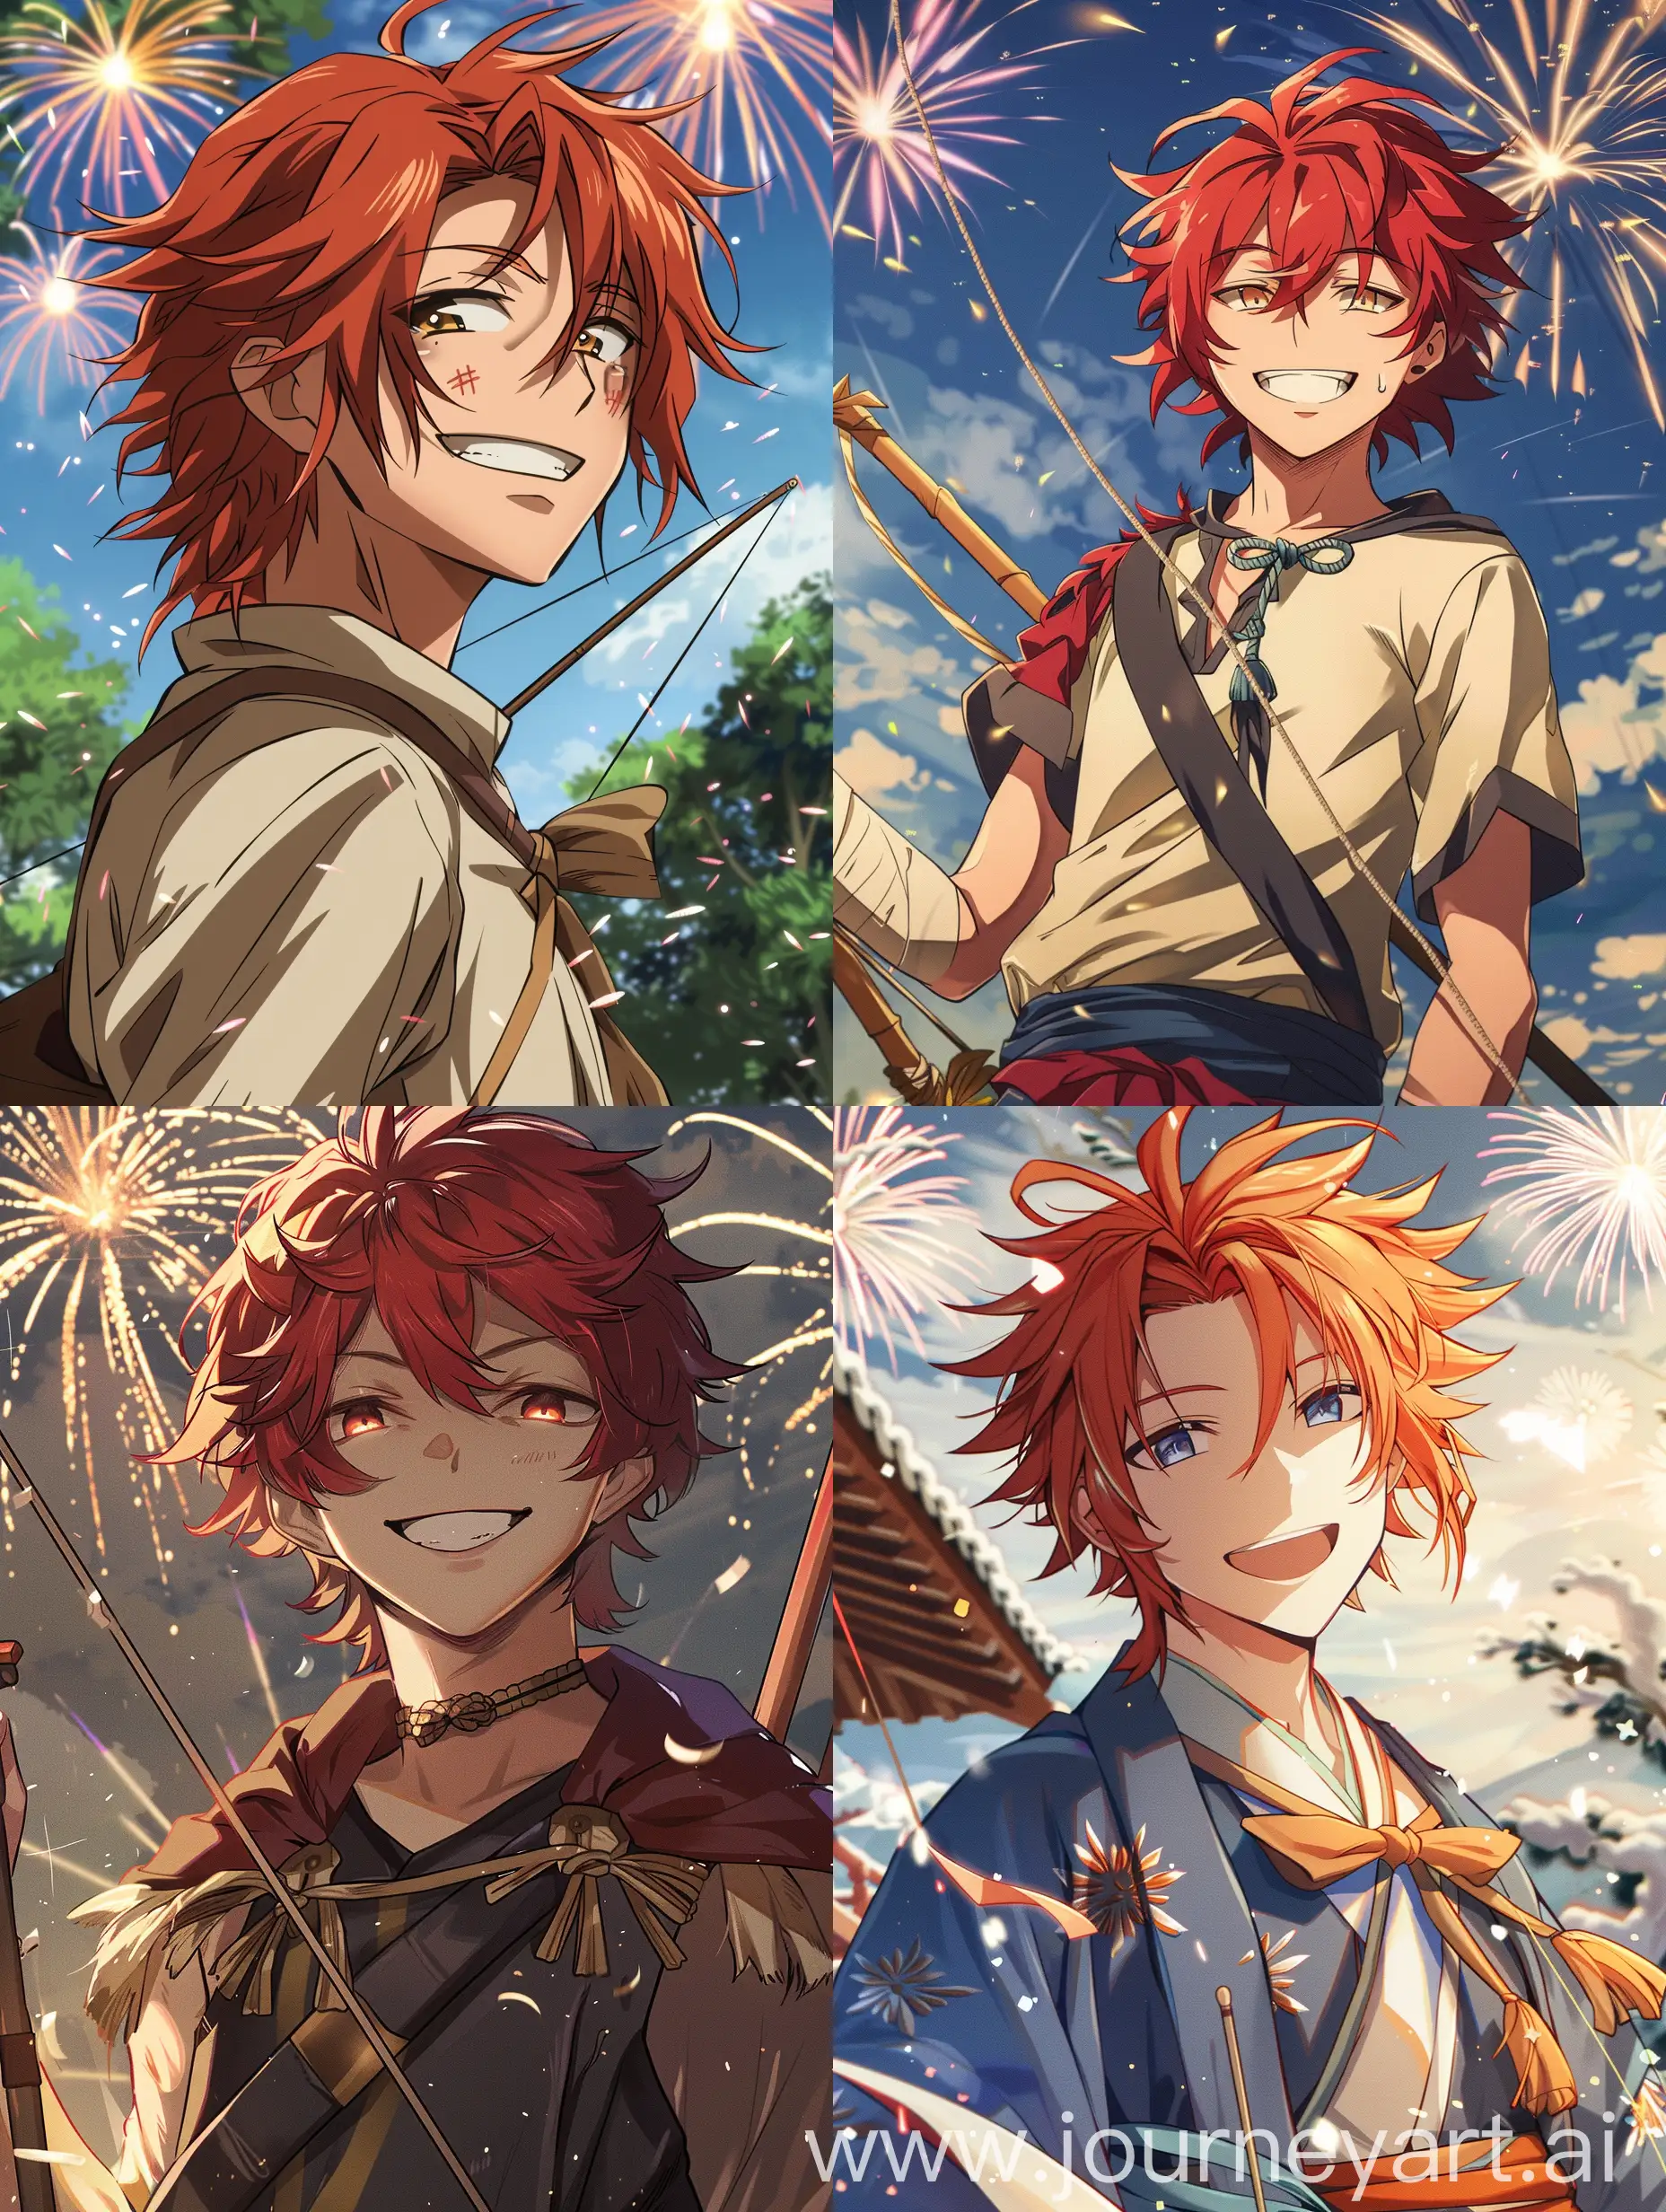 Holiday, fireworks, red-haired young man with a bow smiling, anime style